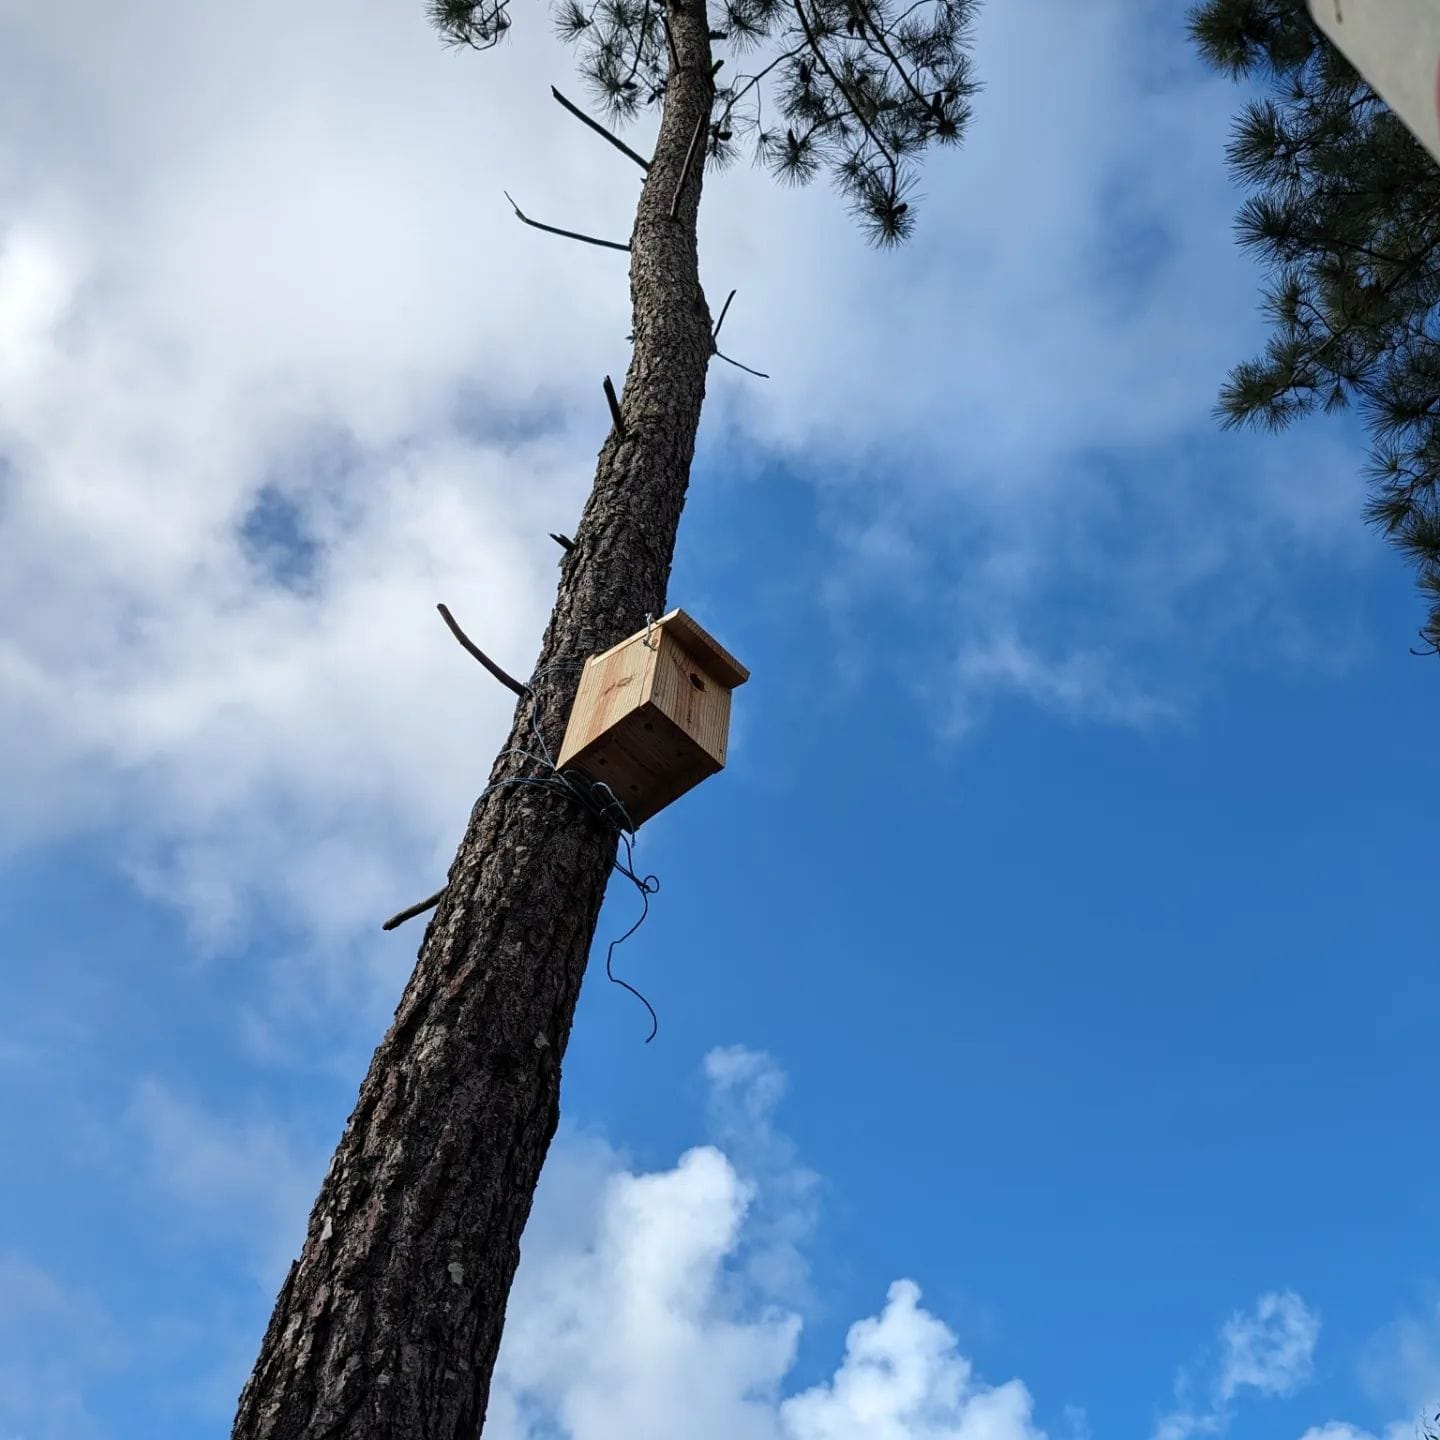 The remaining 3 blue tit nest boxes are now in place